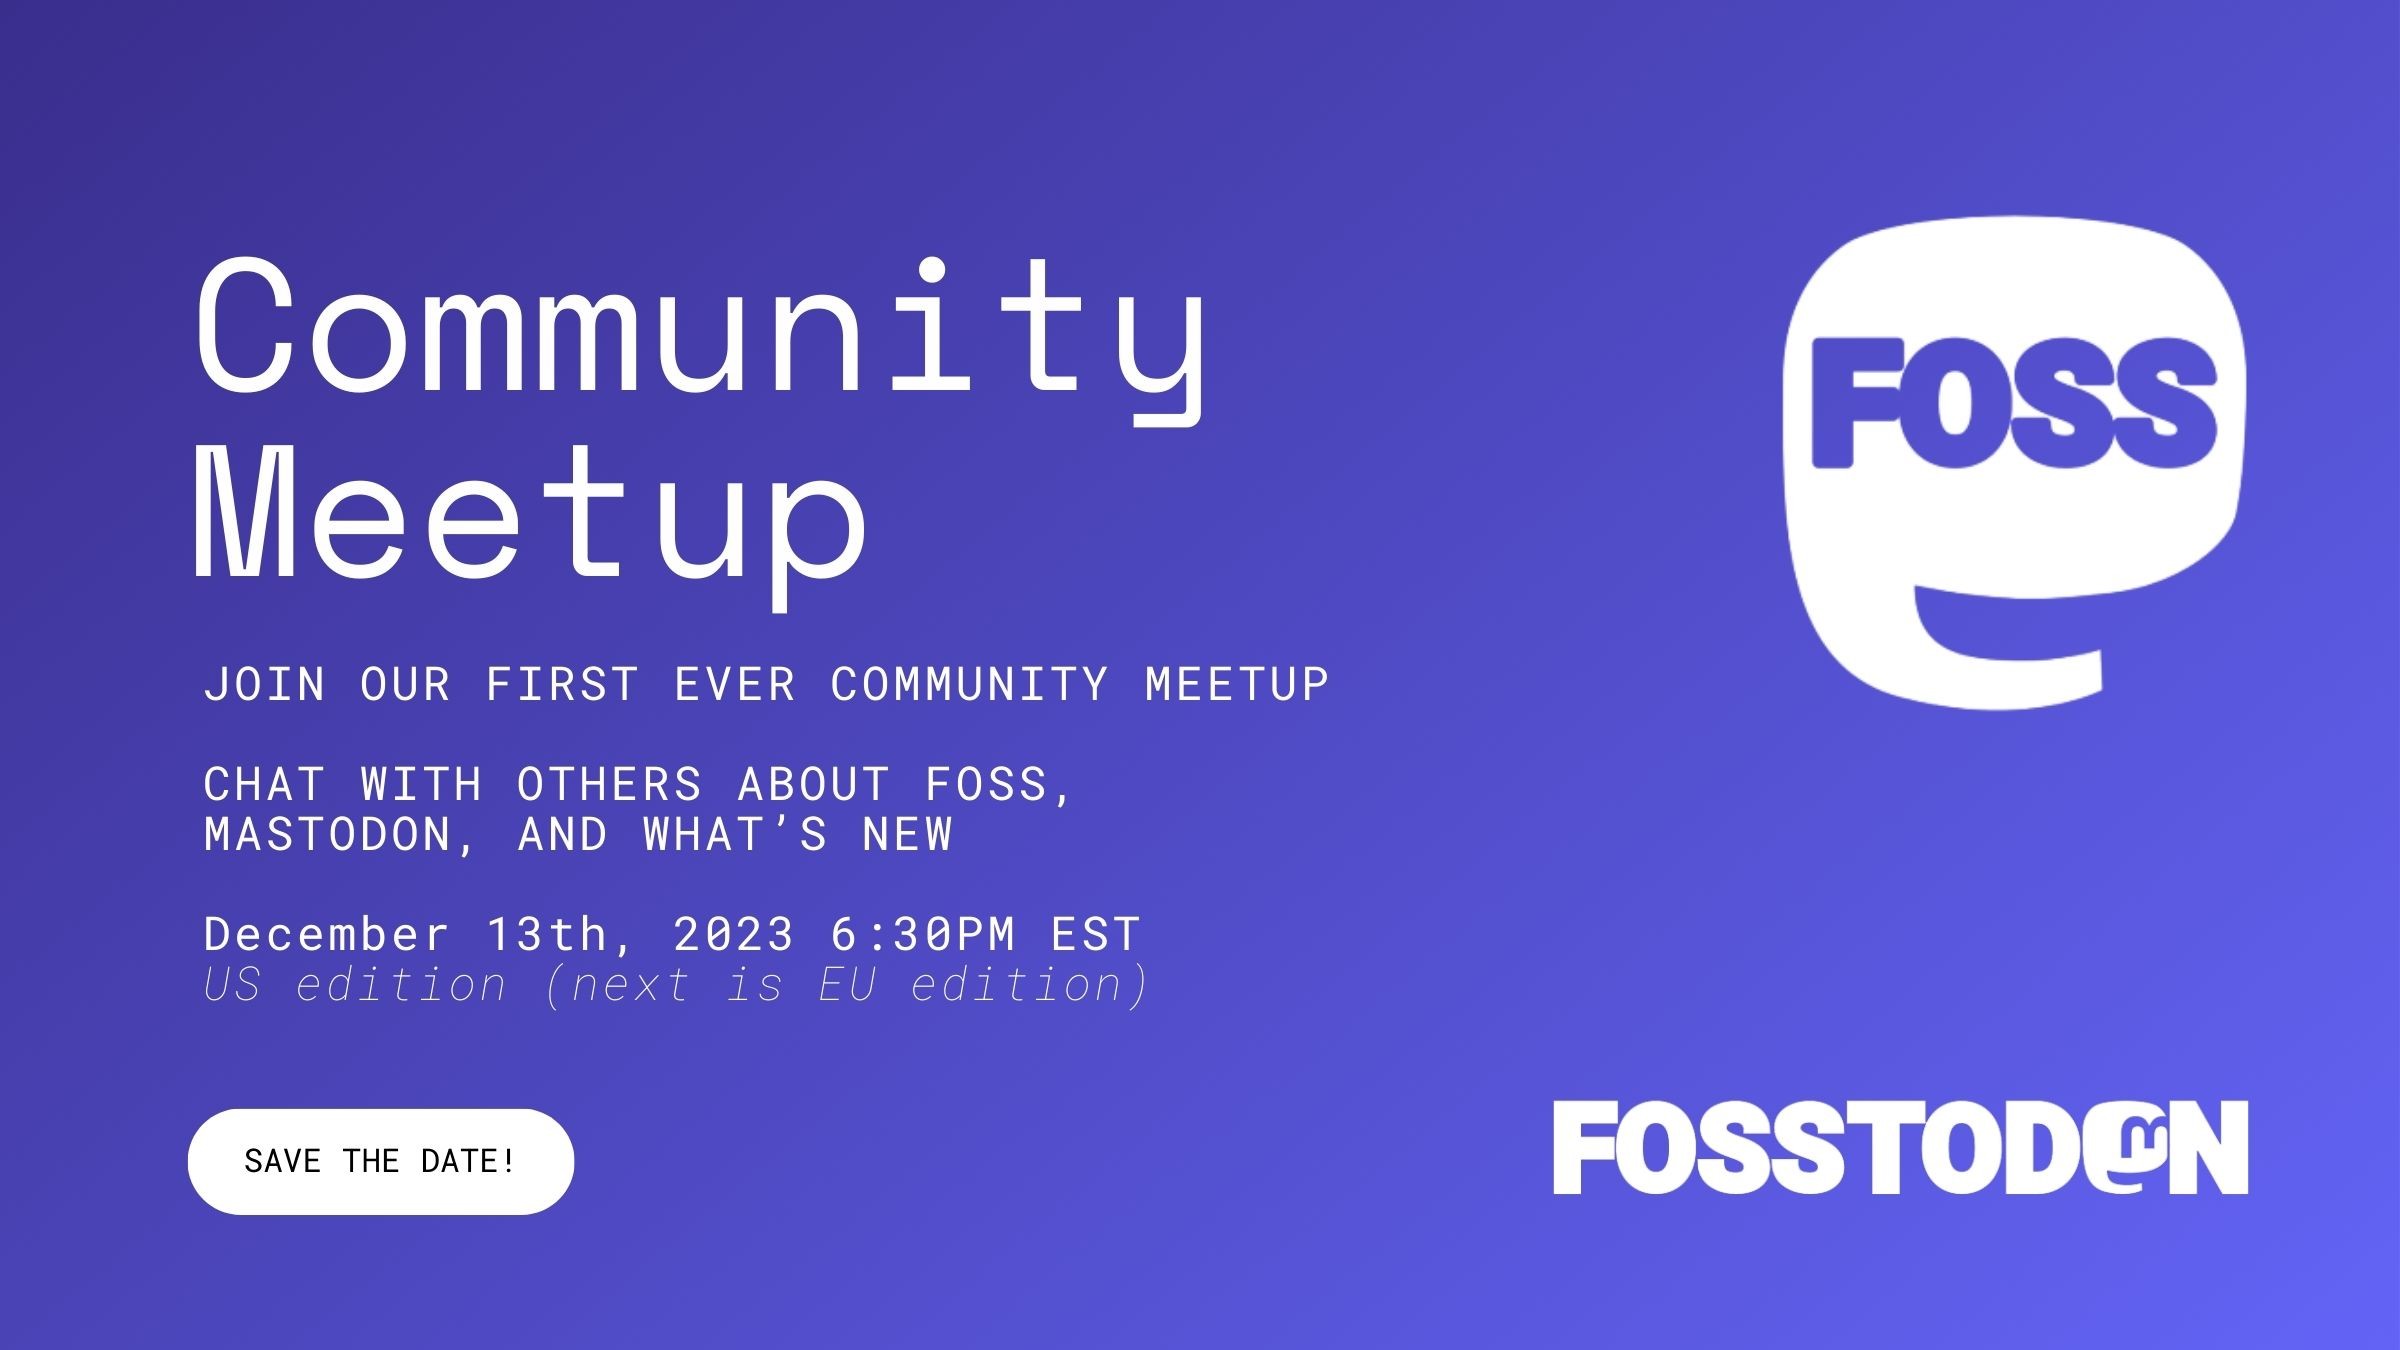 FIRST EVER COMMUNITY MEETUP